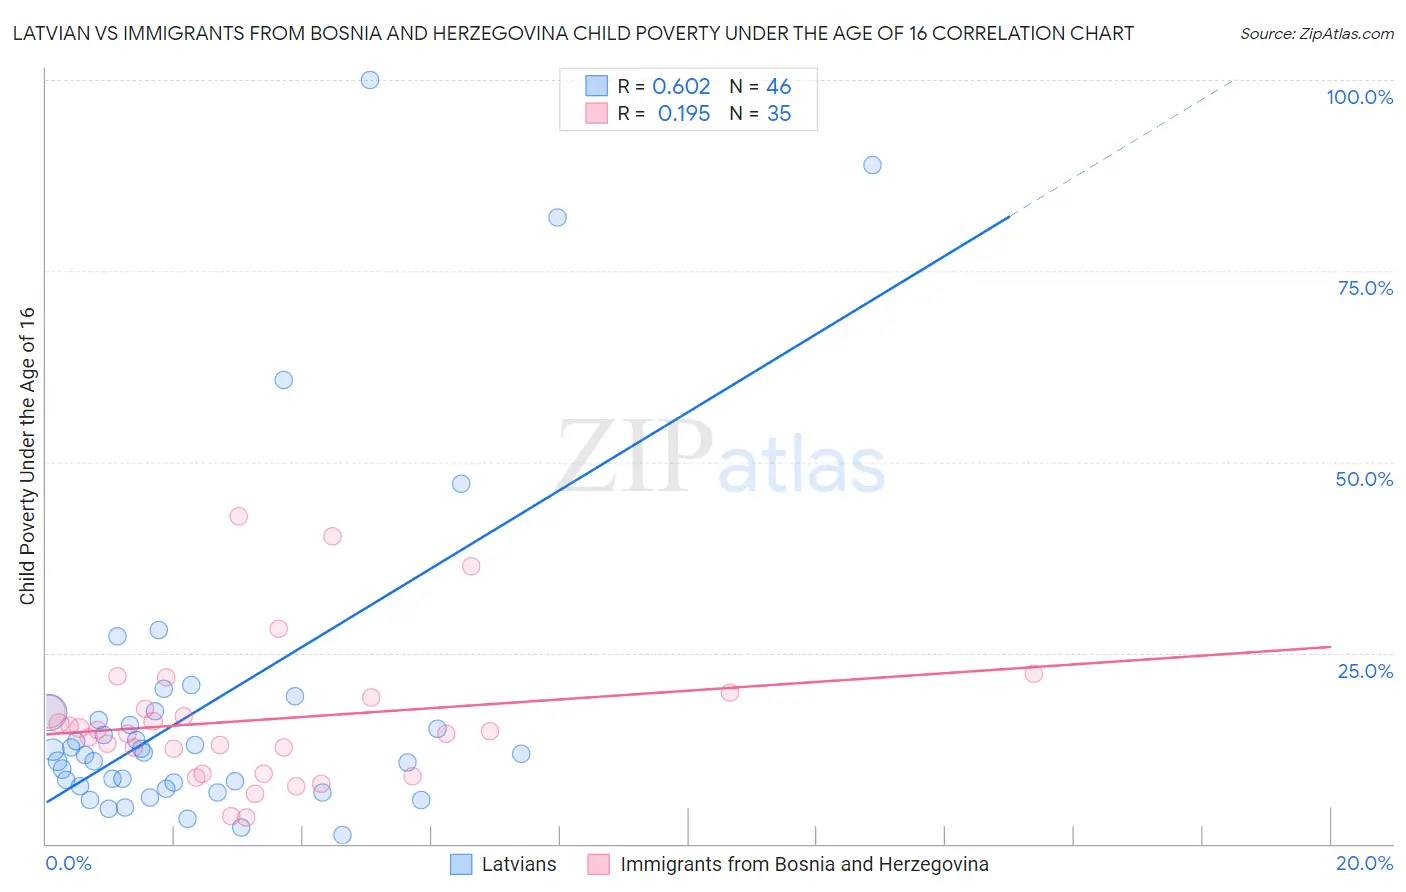 Latvian vs Immigrants from Bosnia and Herzegovina Child Poverty Under the Age of 16